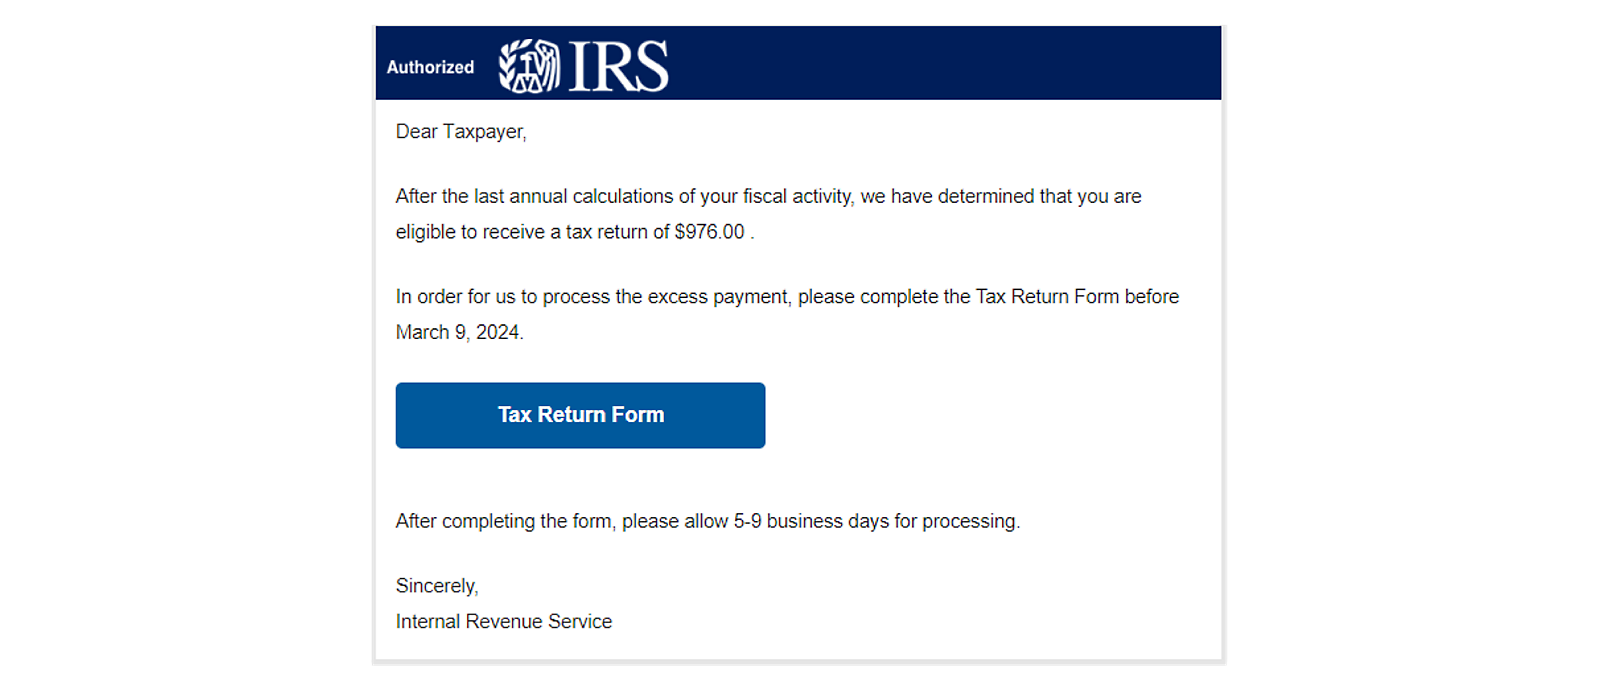 A phishing email with an Authorized IRS header image taken from an authentic third-party payment processor website. 